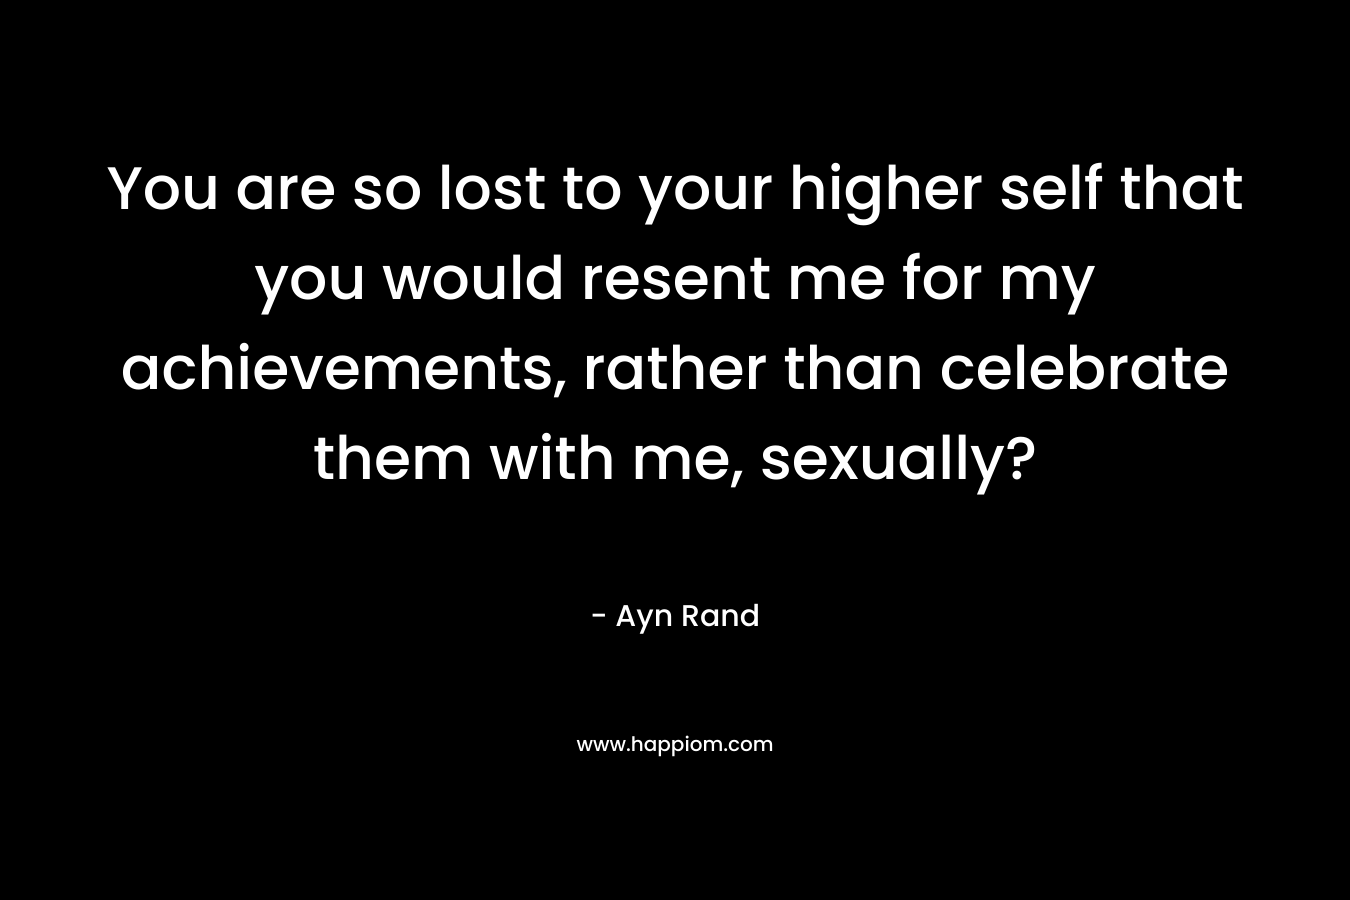 You are so lost to your higher self that you would resent me for my achievements, rather than celebrate them with me, sexually?